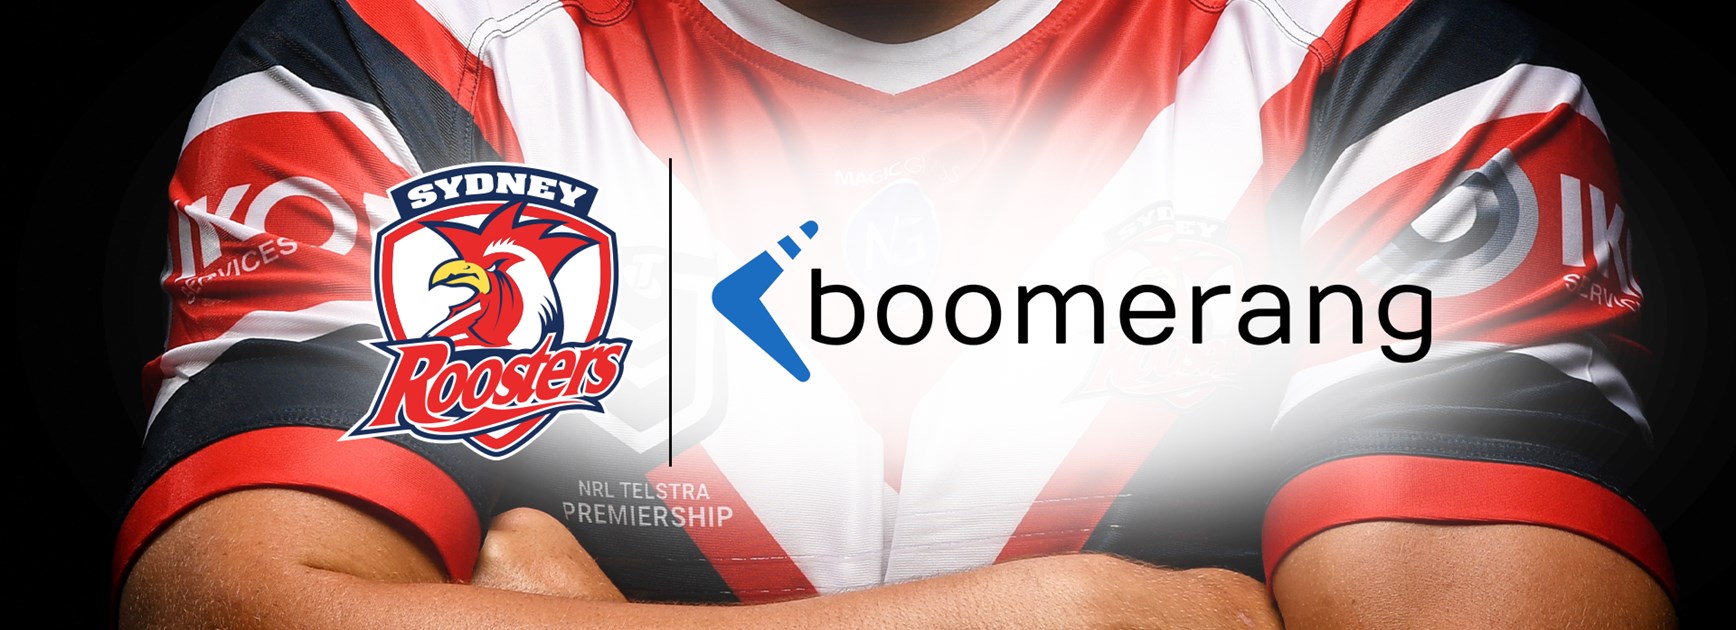 Boomerang Add Further Support To Tarsha Gale Team